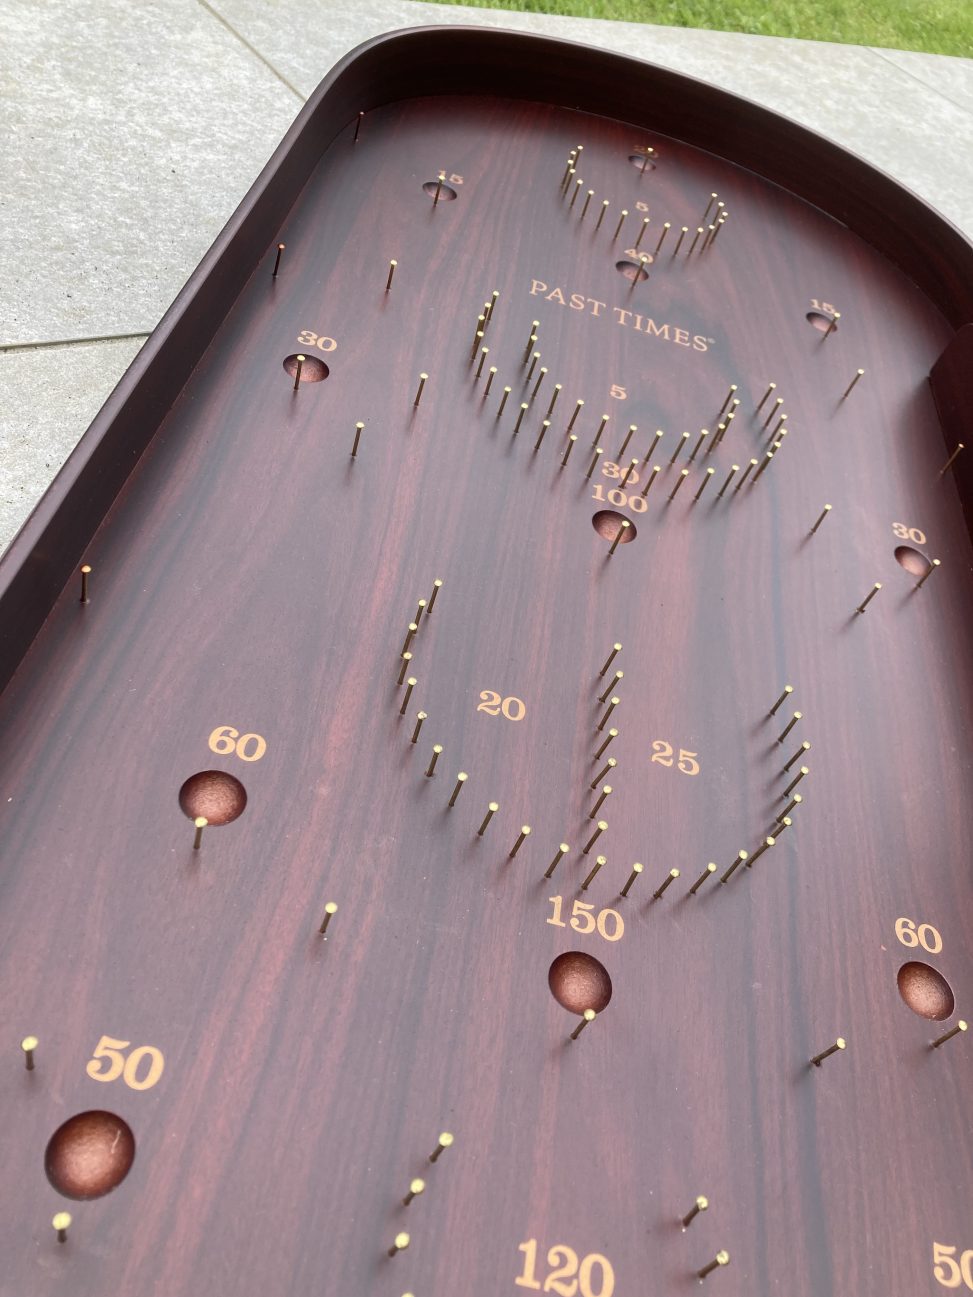 Bagatelle table top game for hire